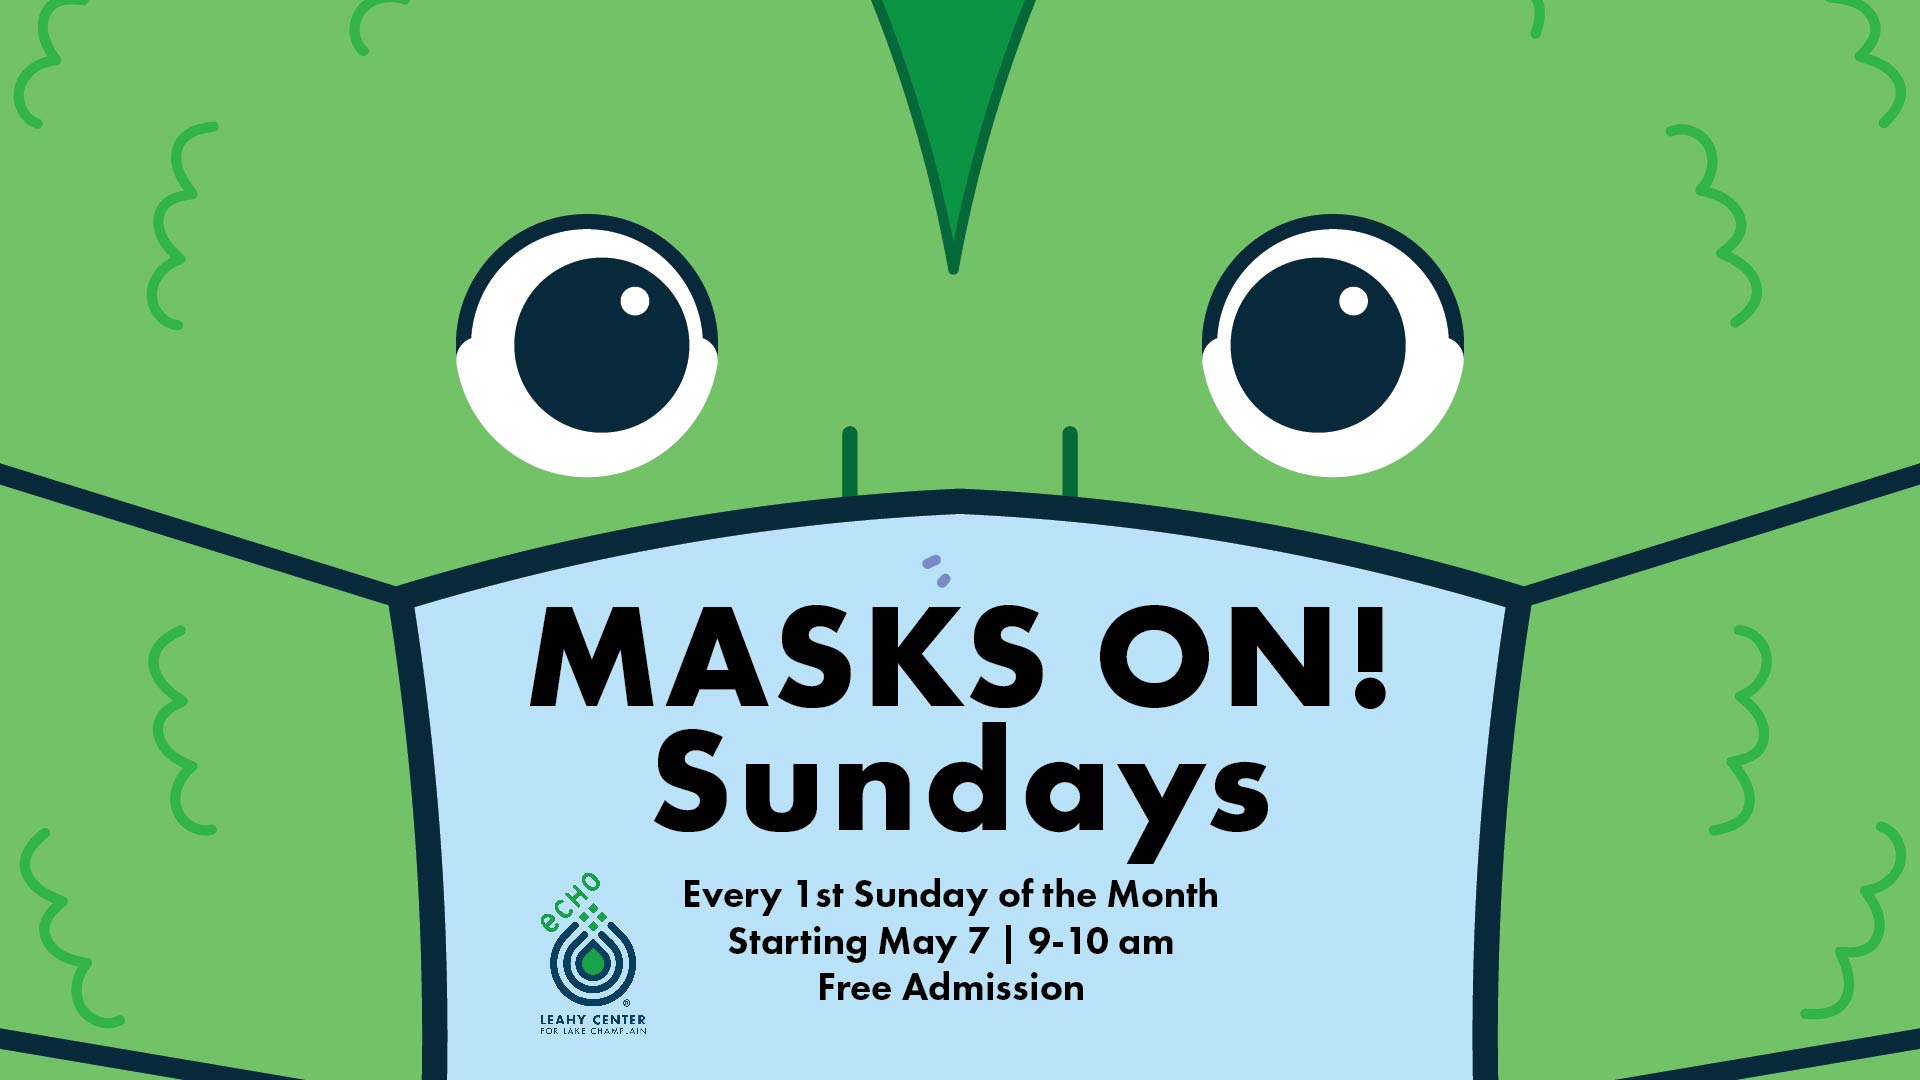 MASKS ON! Sundays Every 1st Sunday of the Month, Starting May 7th. 9-10 AM. Free Admission.